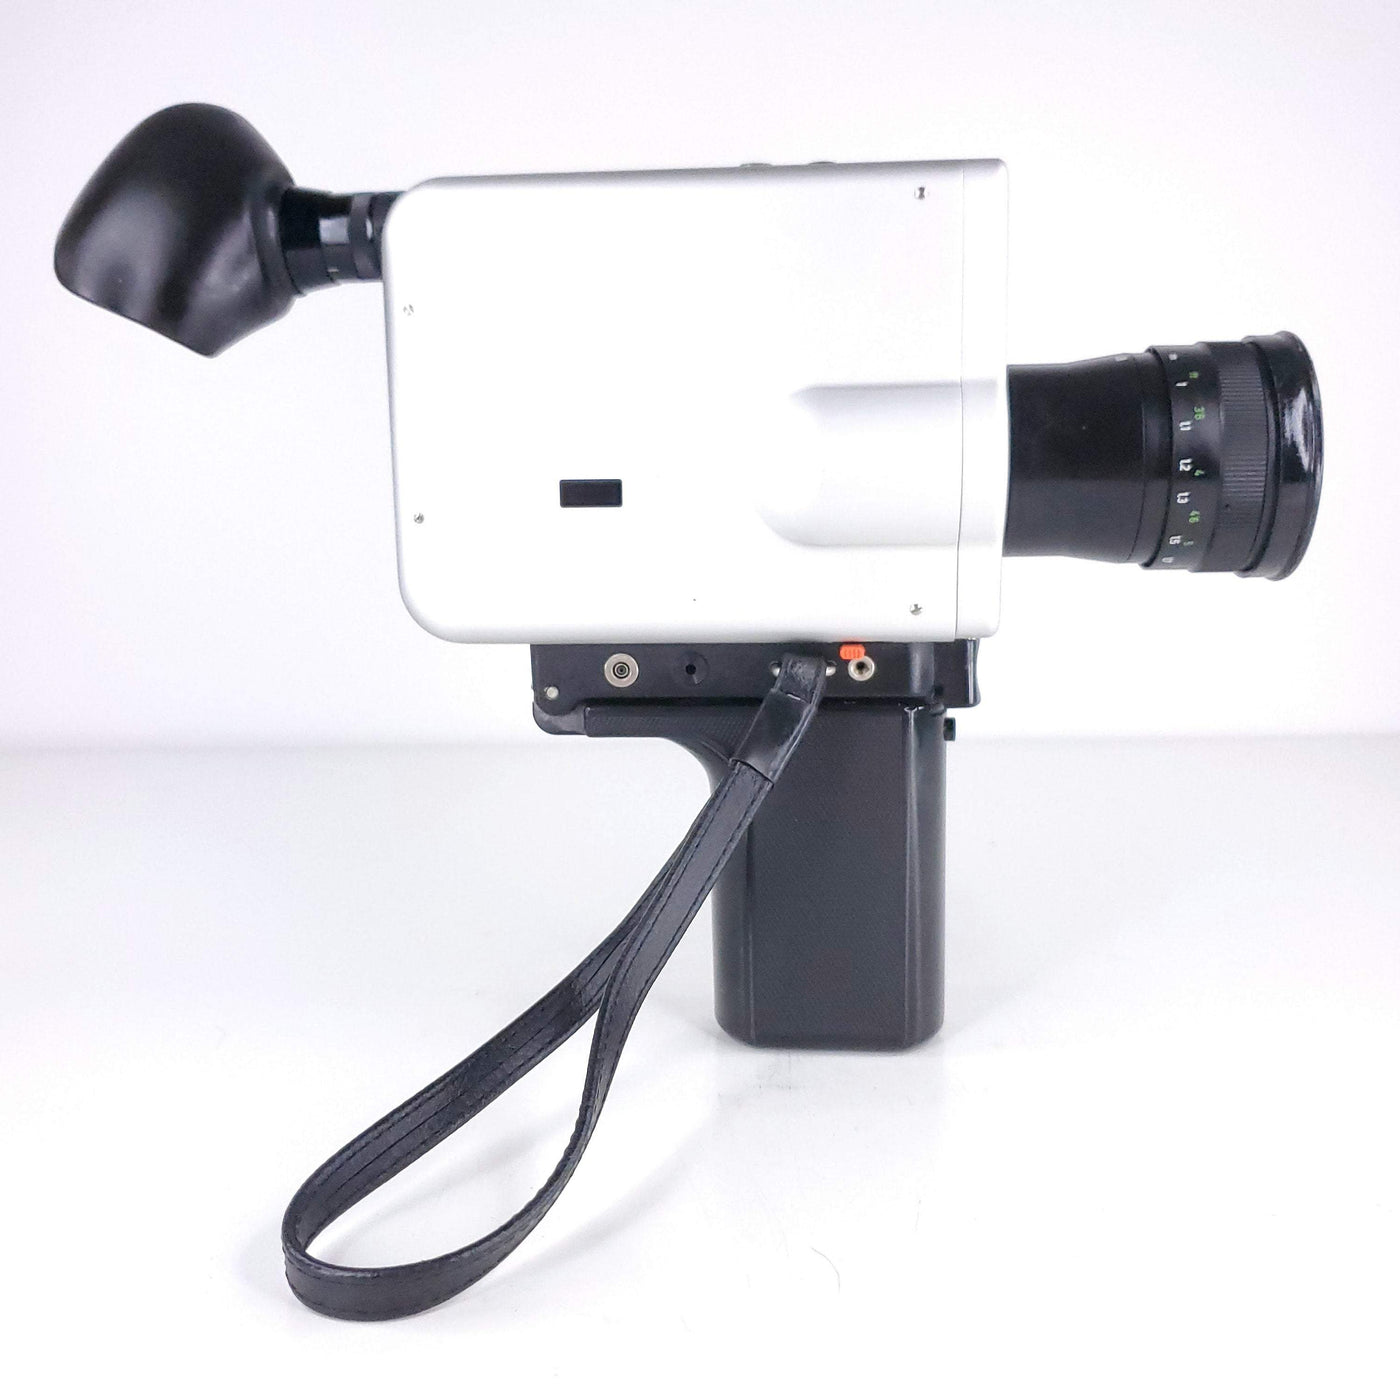 Nizo S480 Super 8 Camera Fully Tested and Functioning  - Includes Light meter battery adapters, Lens Cap, & Leather Bag